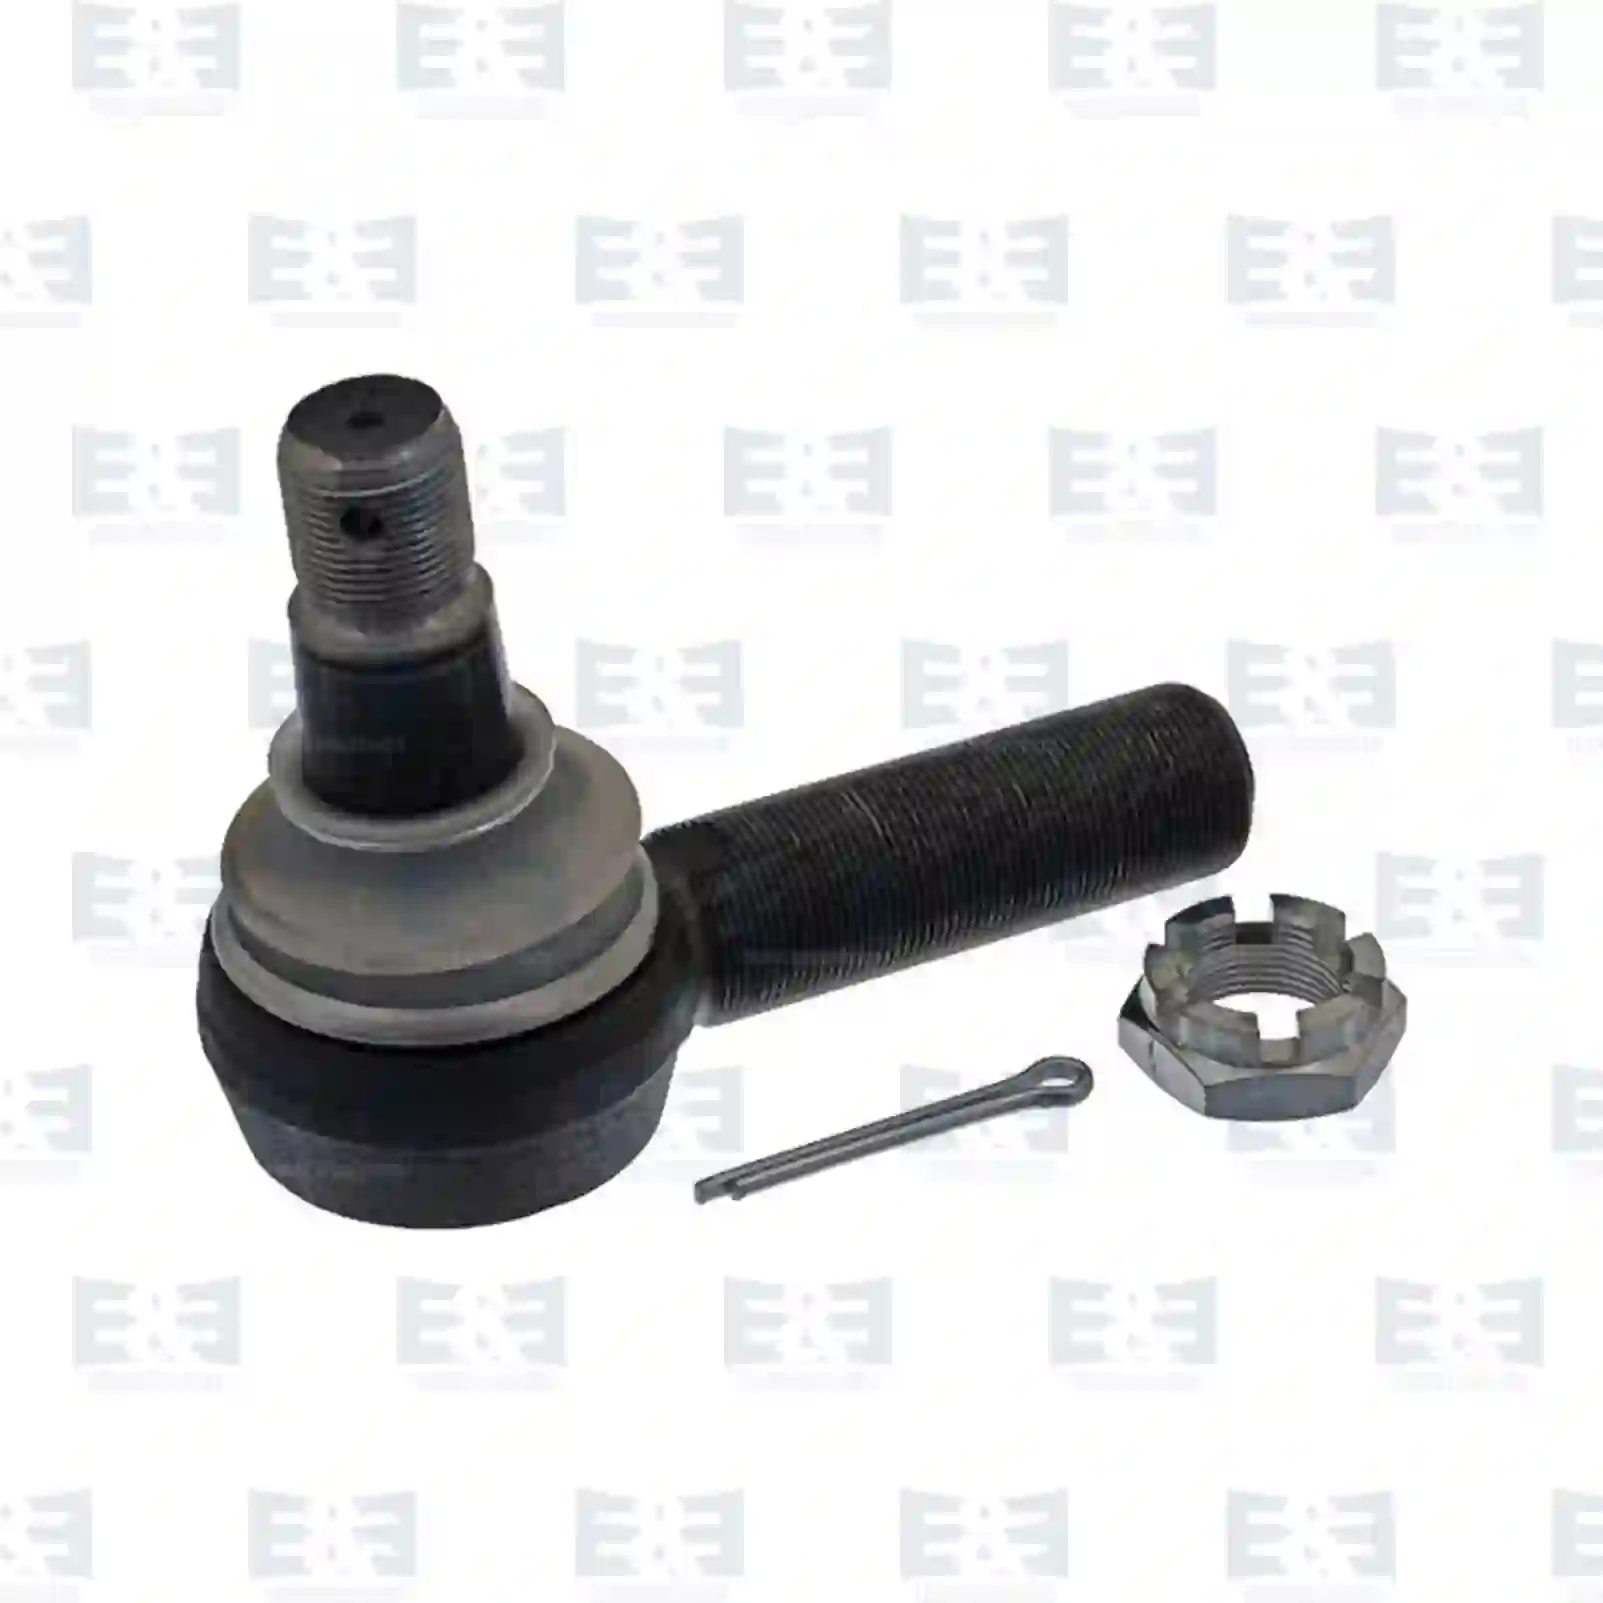 Ball joint, left hand thread, 2E2205905, 9P914835, 264072, 510052, 3141529R3, 0607053, 0690225, 0696225, 1142021, 1228115, 1329134, 1611088, 607053, 690225, 696205, 696225, 655551, 02966688, 02980323, 02984061, 03096213, 04802444, 04833820, 04833827, 04833830, 07138966, 08122754, 08190225, 42483520, 42485718, 42489395, 42491957, 42493781, 997084080374, 02984061, 04802444, 04833829, 04833830, 42489395, 42489574, 42491957, Y04505101, 56812-7M100, 02984061, 04802444, 04833823, 04833830, 07138966, 08190225, 2984061, 42489395, 42489574, 42491957, 4802444, 4833830, 5001836297, 801211834, 8190225, 571866508, 725009908, 81953010015, 81953010083, 81953010087, 81953010095, 81953010102, 81953016029, 81953016044, 81953016050, 81953016054, 81953016087, 81953016091, 81953016099, 81953016107, 81953016120, 81953016125, 81953016152, 81953016155, 81953016157, 81953016167, 81953016177, 81953016179, 81953016181, 81953016223, 81953016237, 81953016253, 81953016254, 81953016275, 81953016279, 81953016285, 81953016309, 81953016311, 81953016348, 81953016351, 81953016378, 84953016004, 90804102273, 90804102730, N1011020299, 0003300135, 0004600648, 0004601248, 0004603448, 0004603548, 0014600348, 0014601448, 0014602348, 0014603648, 0014603748, 0014607848, 0014608748, 0016077848, 0024600348, 3503307335, 3503307535, 6851476000, 6984603748, 8226236058, 011015685, 011019661, 120325101, 120325200, 122353201, 579343, 0003401170, 5000242478, 5000242486, 5000288361, 5000288378, 5000587534, 5000823265, 5000858774, 5001832581, 5001836297, 5001858759, 5001858774, 5010832583, 5430027884, 7420894053, 8001858759, 1358792, 1420821, 1738380, 1914426, 2021425, 2051165, 283783, 395009, 6851481000, 6851485000, 8226236058, 0801211834, 218633100115, 634301300, 20264072, 15176472, 1696057, 1697297, 20742129, 20745042, 20821150, 20894053, ZG40346-0008 ||  2E2205905 E&E Truck Spare Parts | Truck Spare Parts, Auotomotive Spare Parts Ball joint, left hand thread, 2E2205905, 9P914835, 264072, 510052, 3141529R3, 0607053, 0690225, 0696225, 1142021, 1228115, 1329134, 1611088, 607053, 690225, 696205, 696225, 655551, 02966688, 02980323, 02984061, 03096213, 04802444, 04833820, 04833827, 04833830, 07138966, 08122754, 08190225, 42483520, 42485718, 42489395, 42491957, 42493781, 997084080374, 02984061, 04802444, 04833829, 04833830, 42489395, 42489574, 42491957, Y04505101, 56812-7M100, 02984061, 04802444, 04833823, 04833830, 07138966, 08190225, 2984061, 42489395, 42489574, 42491957, 4802444, 4833830, 5001836297, 801211834, 8190225, 571866508, 725009908, 81953010015, 81953010083, 81953010087, 81953010095, 81953010102, 81953016029, 81953016044, 81953016050, 81953016054, 81953016087, 81953016091, 81953016099, 81953016107, 81953016120, 81953016125, 81953016152, 81953016155, 81953016157, 81953016167, 81953016177, 81953016179, 81953016181, 81953016223, 81953016237, 81953016253, 81953016254, 81953016275, 81953016279, 81953016285, 81953016309, 81953016311, 81953016348, 81953016351, 81953016378, 84953016004, 90804102273, 90804102730, N1011020299, 0003300135, 0004600648, 0004601248, 0004603448, 0004603548, 0014600348, 0014601448, 0014602348, 0014603648, 0014603748, 0014607848, 0014608748, 0016077848, 0024600348, 3503307335, 3503307535, 6851476000, 6984603748, 8226236058, 011015685, 011019661, 120325101, 120325200, 122353201, 579343, 0003401170, 5000242478, 5000242486, 5000288361, 5000288378, 5000587534, 5000823265, 5000858774, 5001832581, 5001836297, 5001858759, 5001858774, 5010832583, 5430027884, 7420894053, 8001858759, 1358792, 1420821, 1738380, 1914426, 2021425, 2051165, 283783, 395009, 6851481000, 6851485000, 8226236058, 0801211834, 218633100115, 634301300, 20264072, 15176472, 1696057, 1697297, 20742129, 20745042, 20821150, 20894053, ZG40346-0008 ||  2E2205905 E&E Truck Spare Parts | Truck Spare Parts, Auotomotive Spare Parts